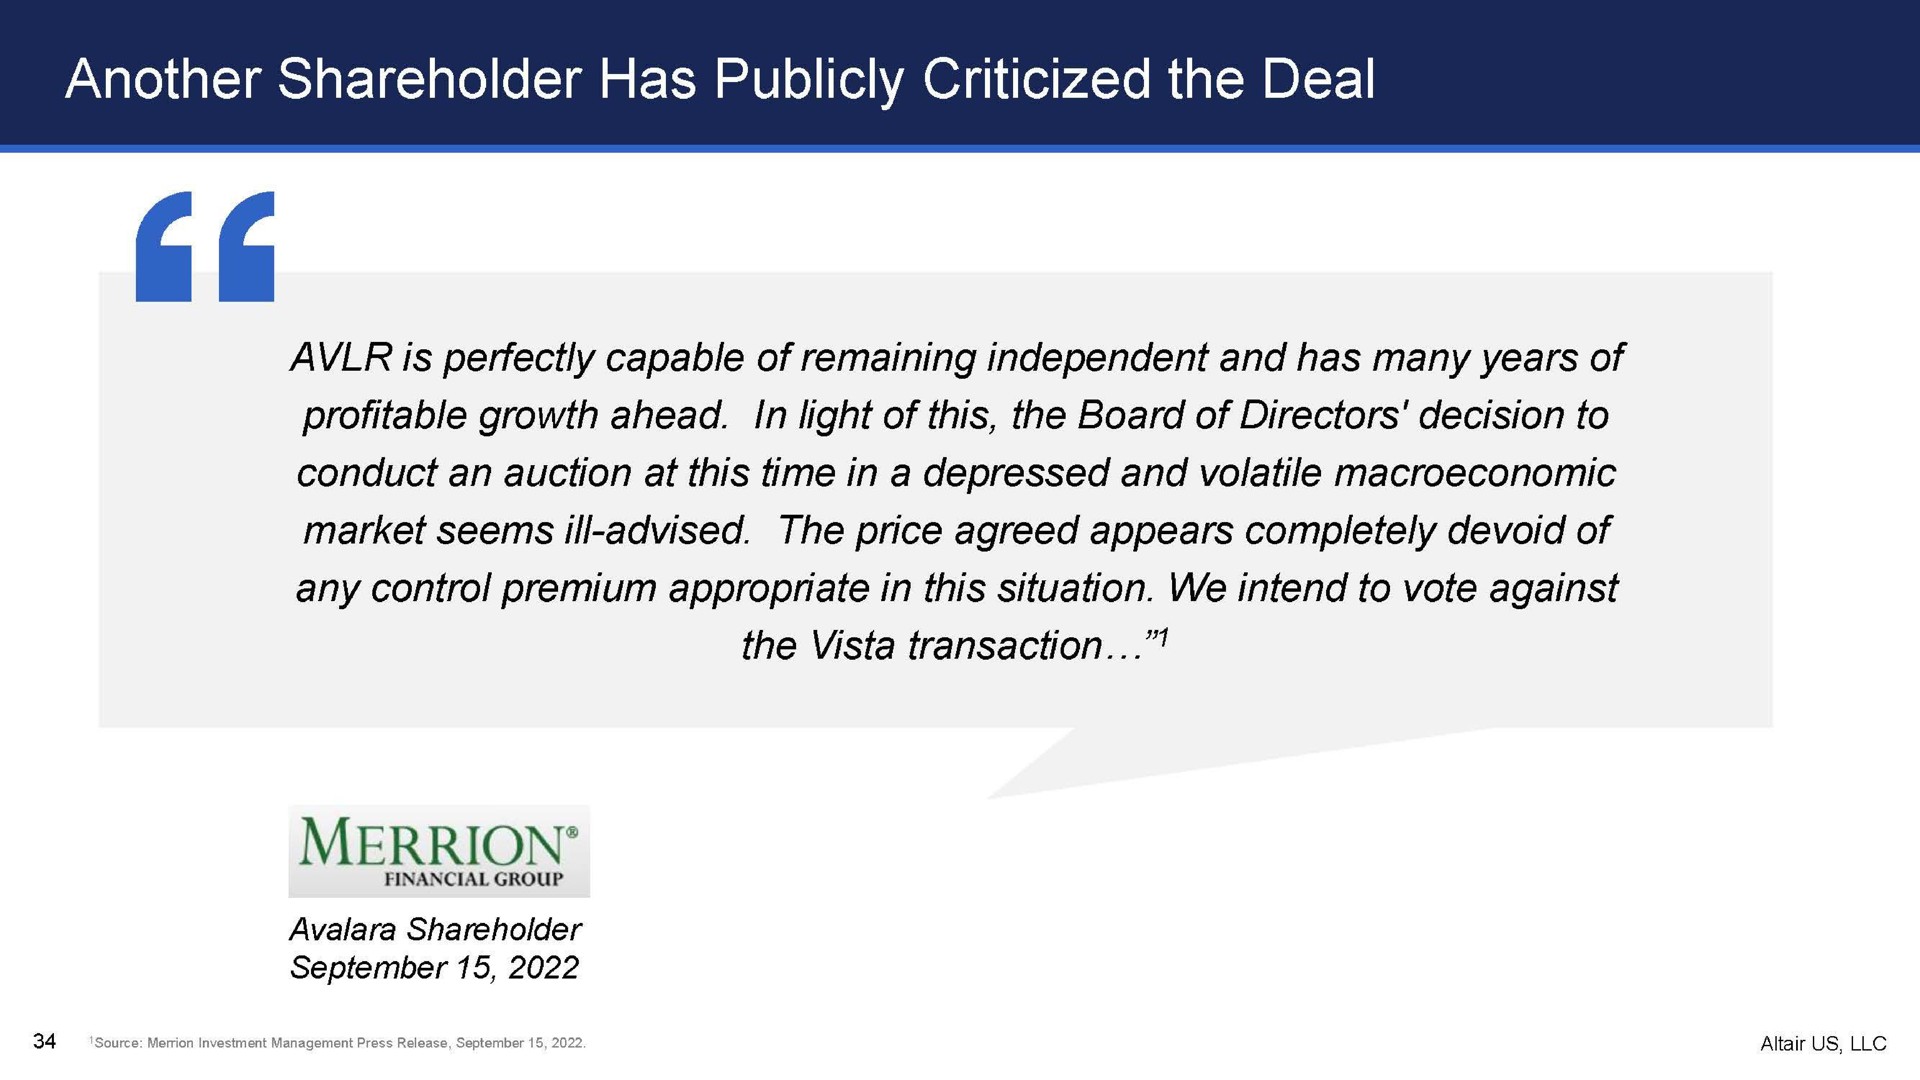 another shareholder has publicly criticized the deal | Altair US LLC